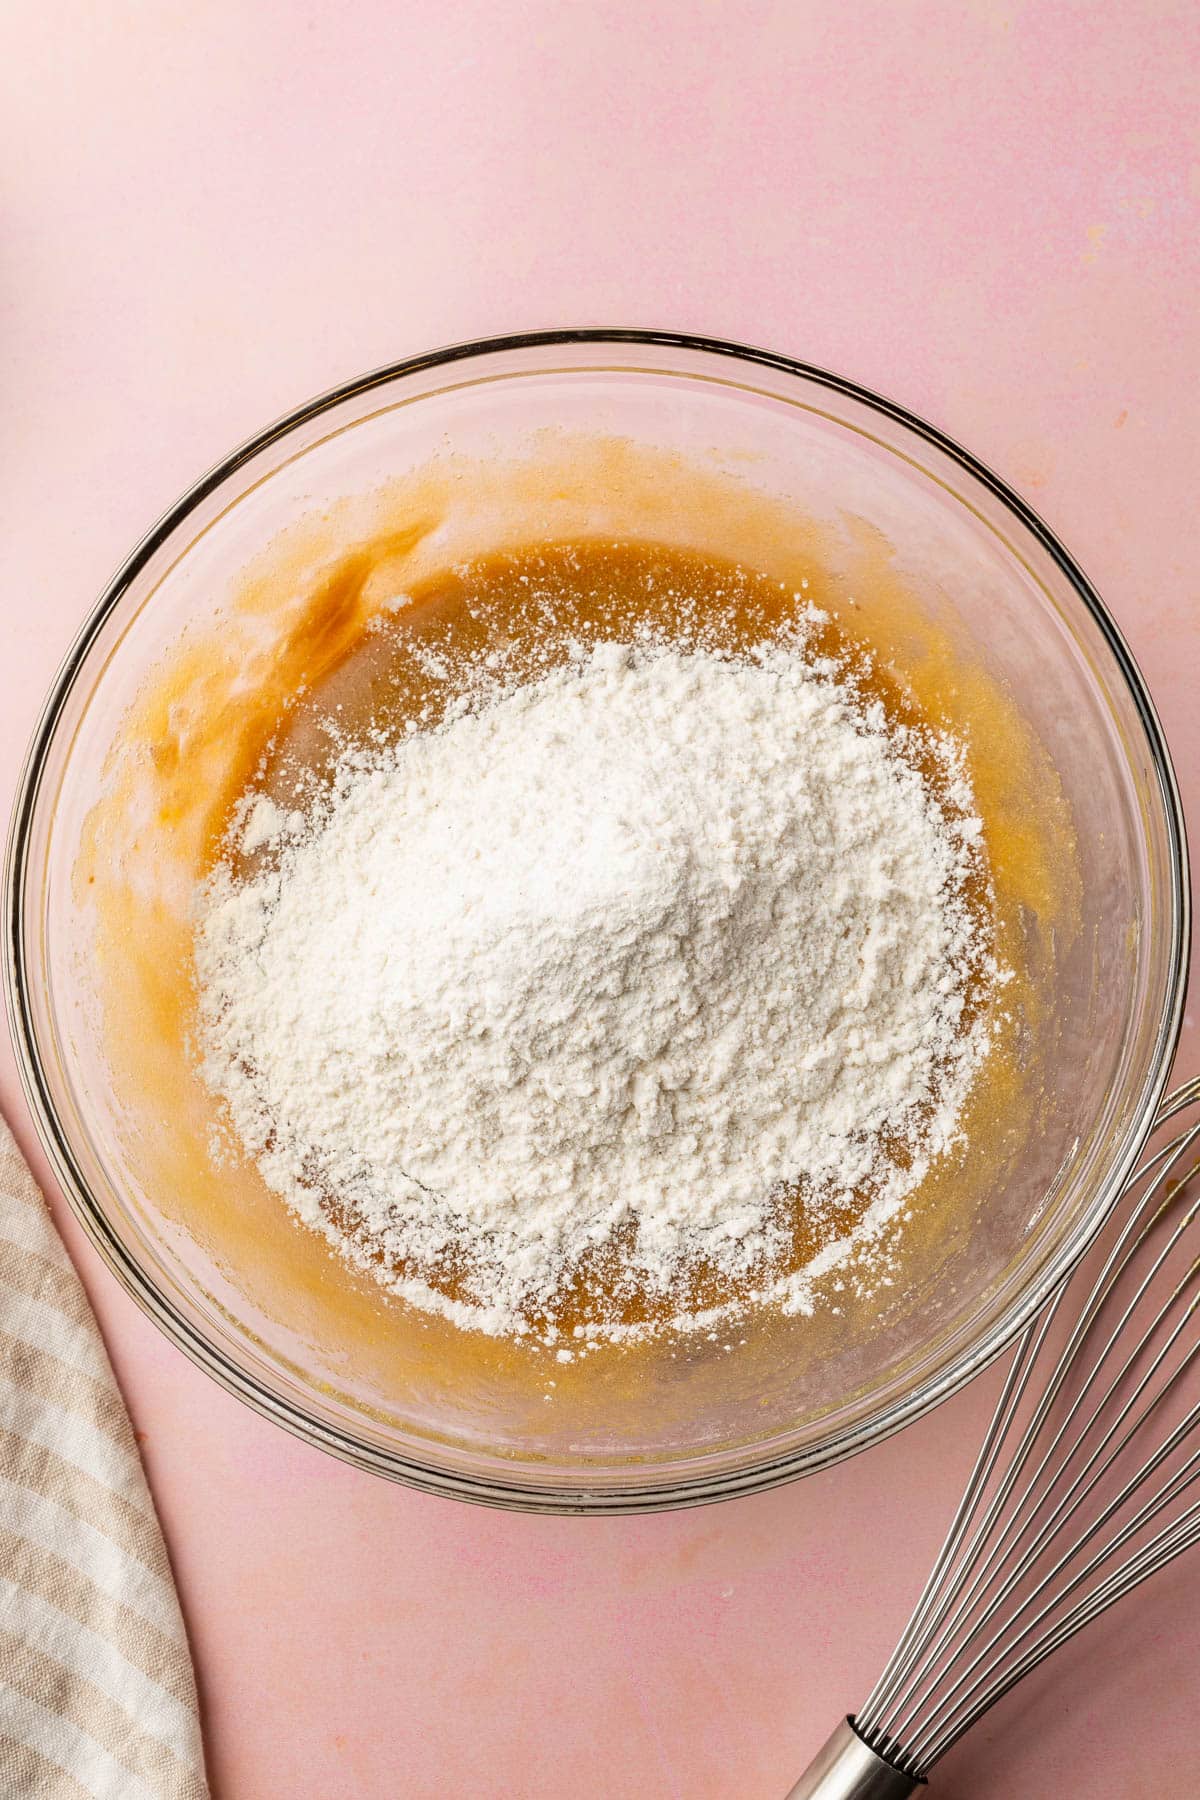 A glass mixing bowl filled with a brown sugar liquid topped with a gluten-free flour blend.